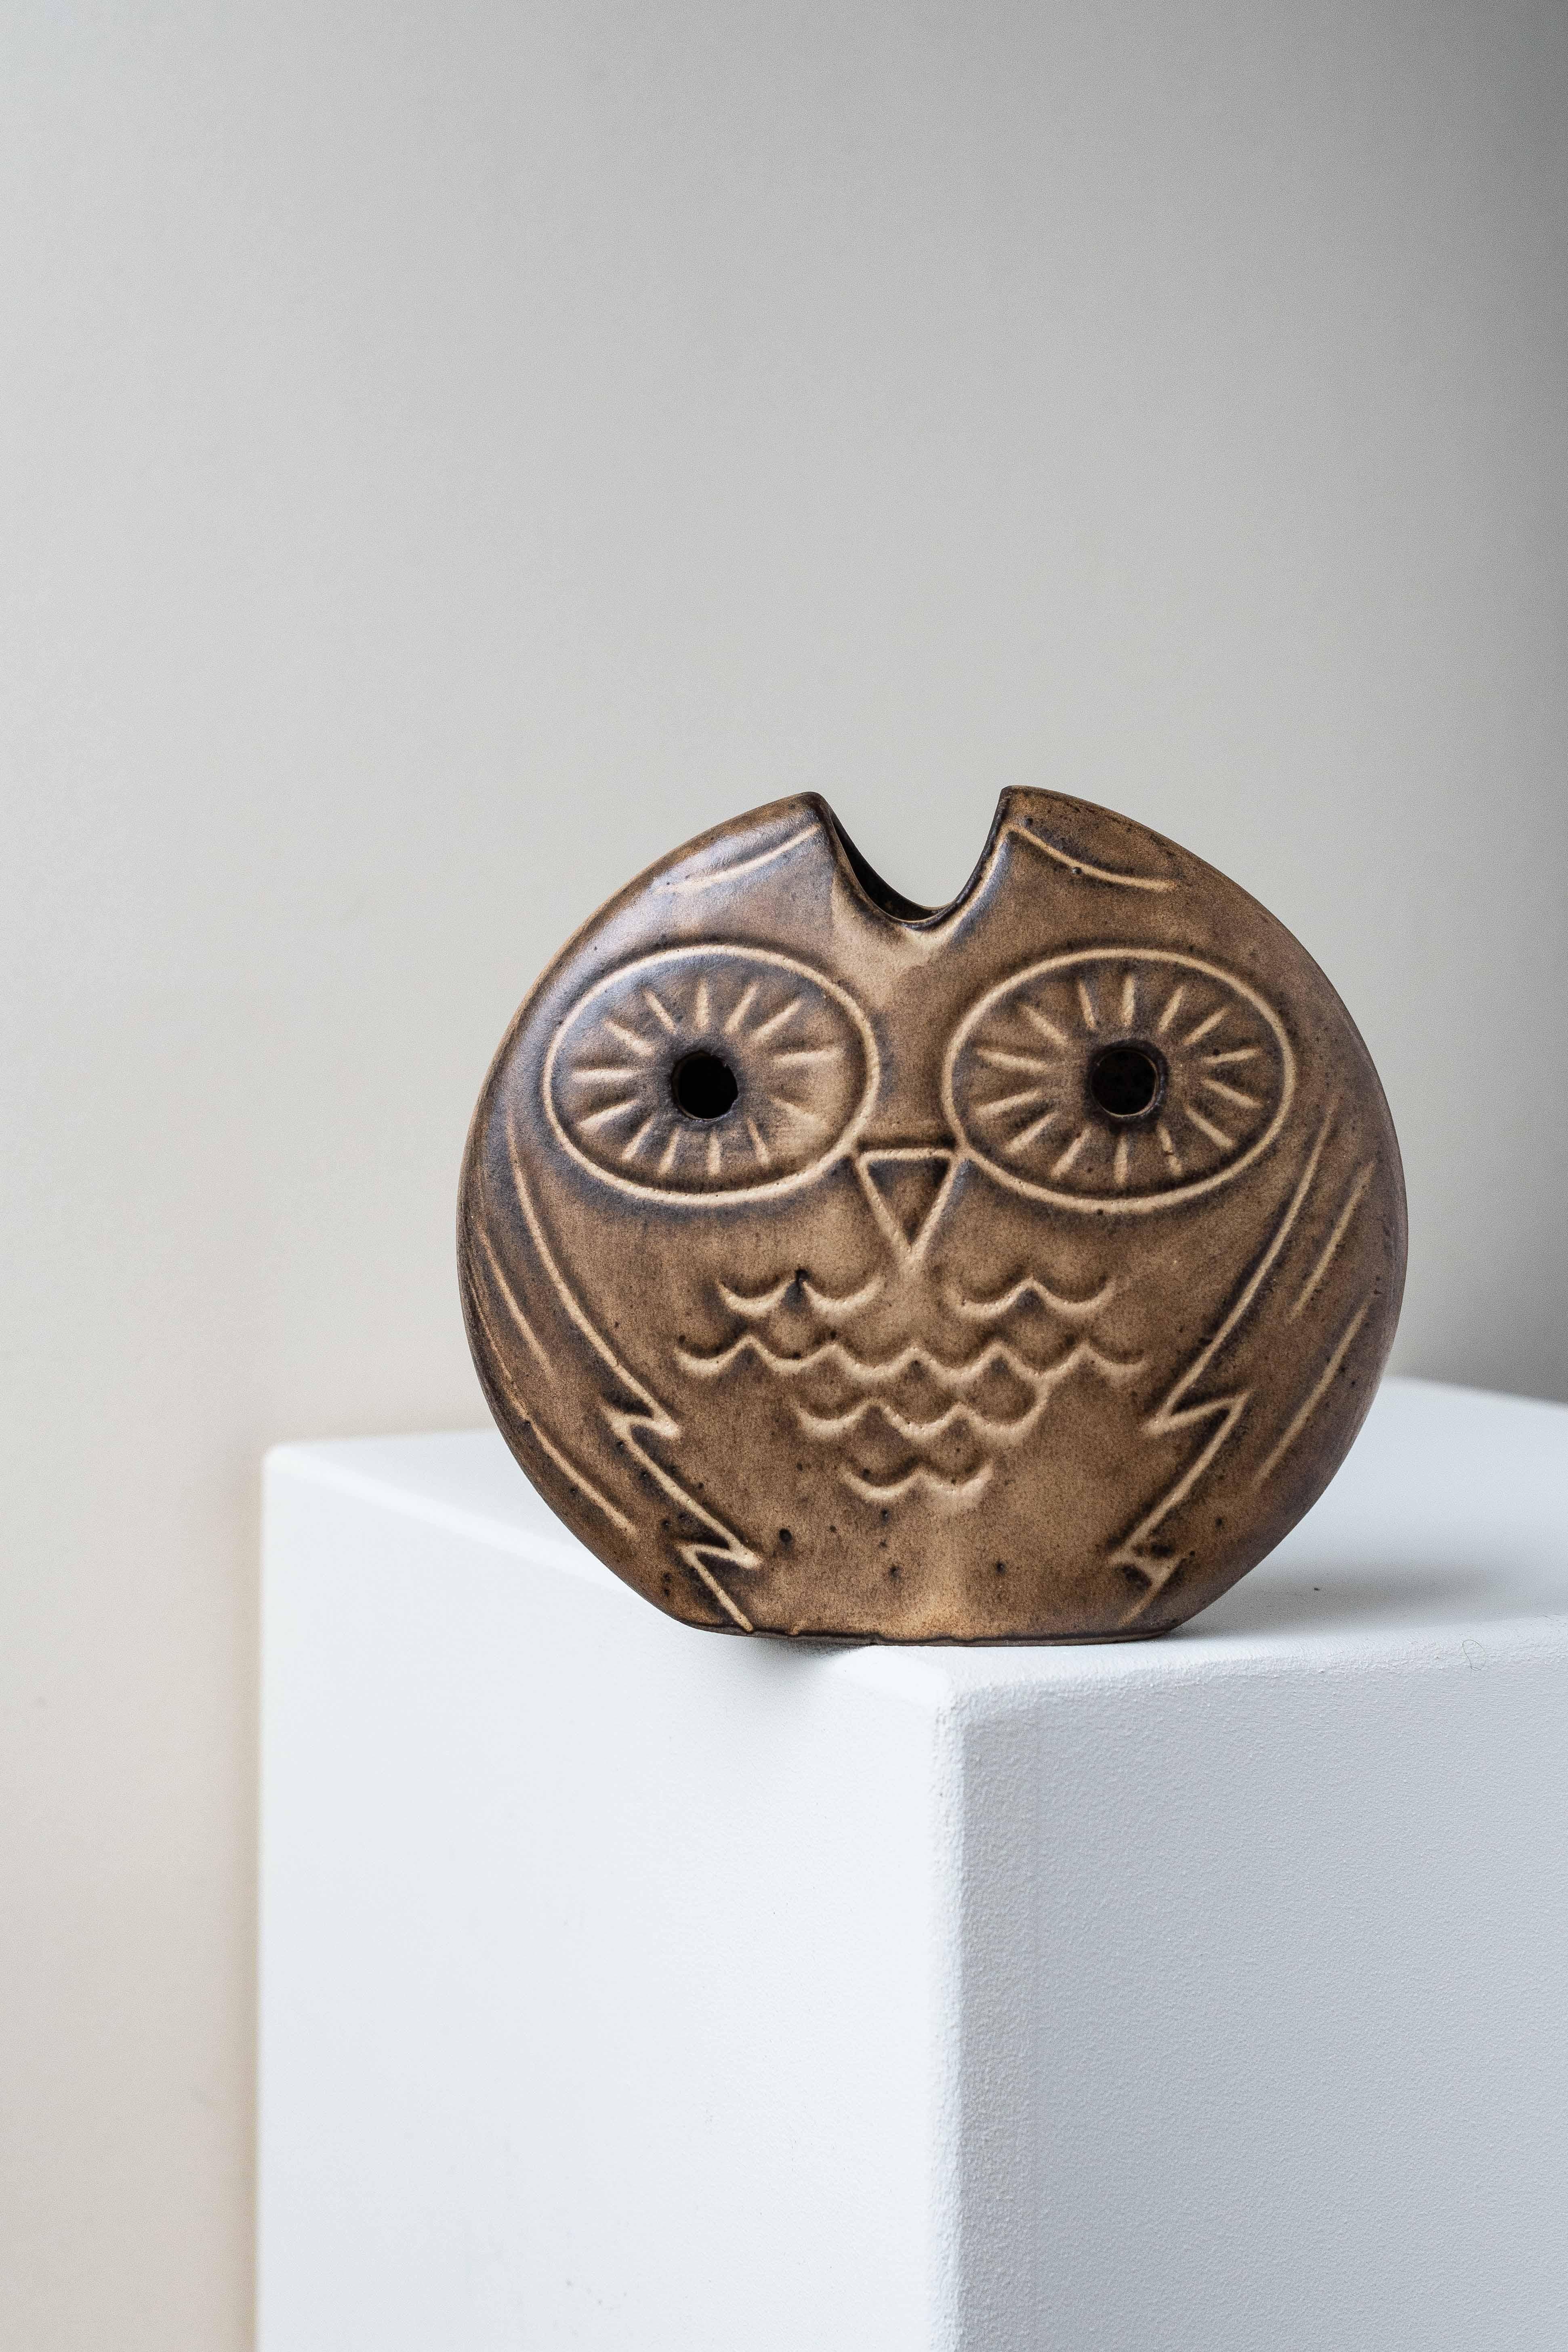 Owl Vase in Ceramic / Sandstone designed in the 1970s.

Enameled in a brown and beige color. 

Nice pyrite enamel giving it a random dotty effect, typical of the period.

Minimal Zoomorphic design.

Signed on the base 